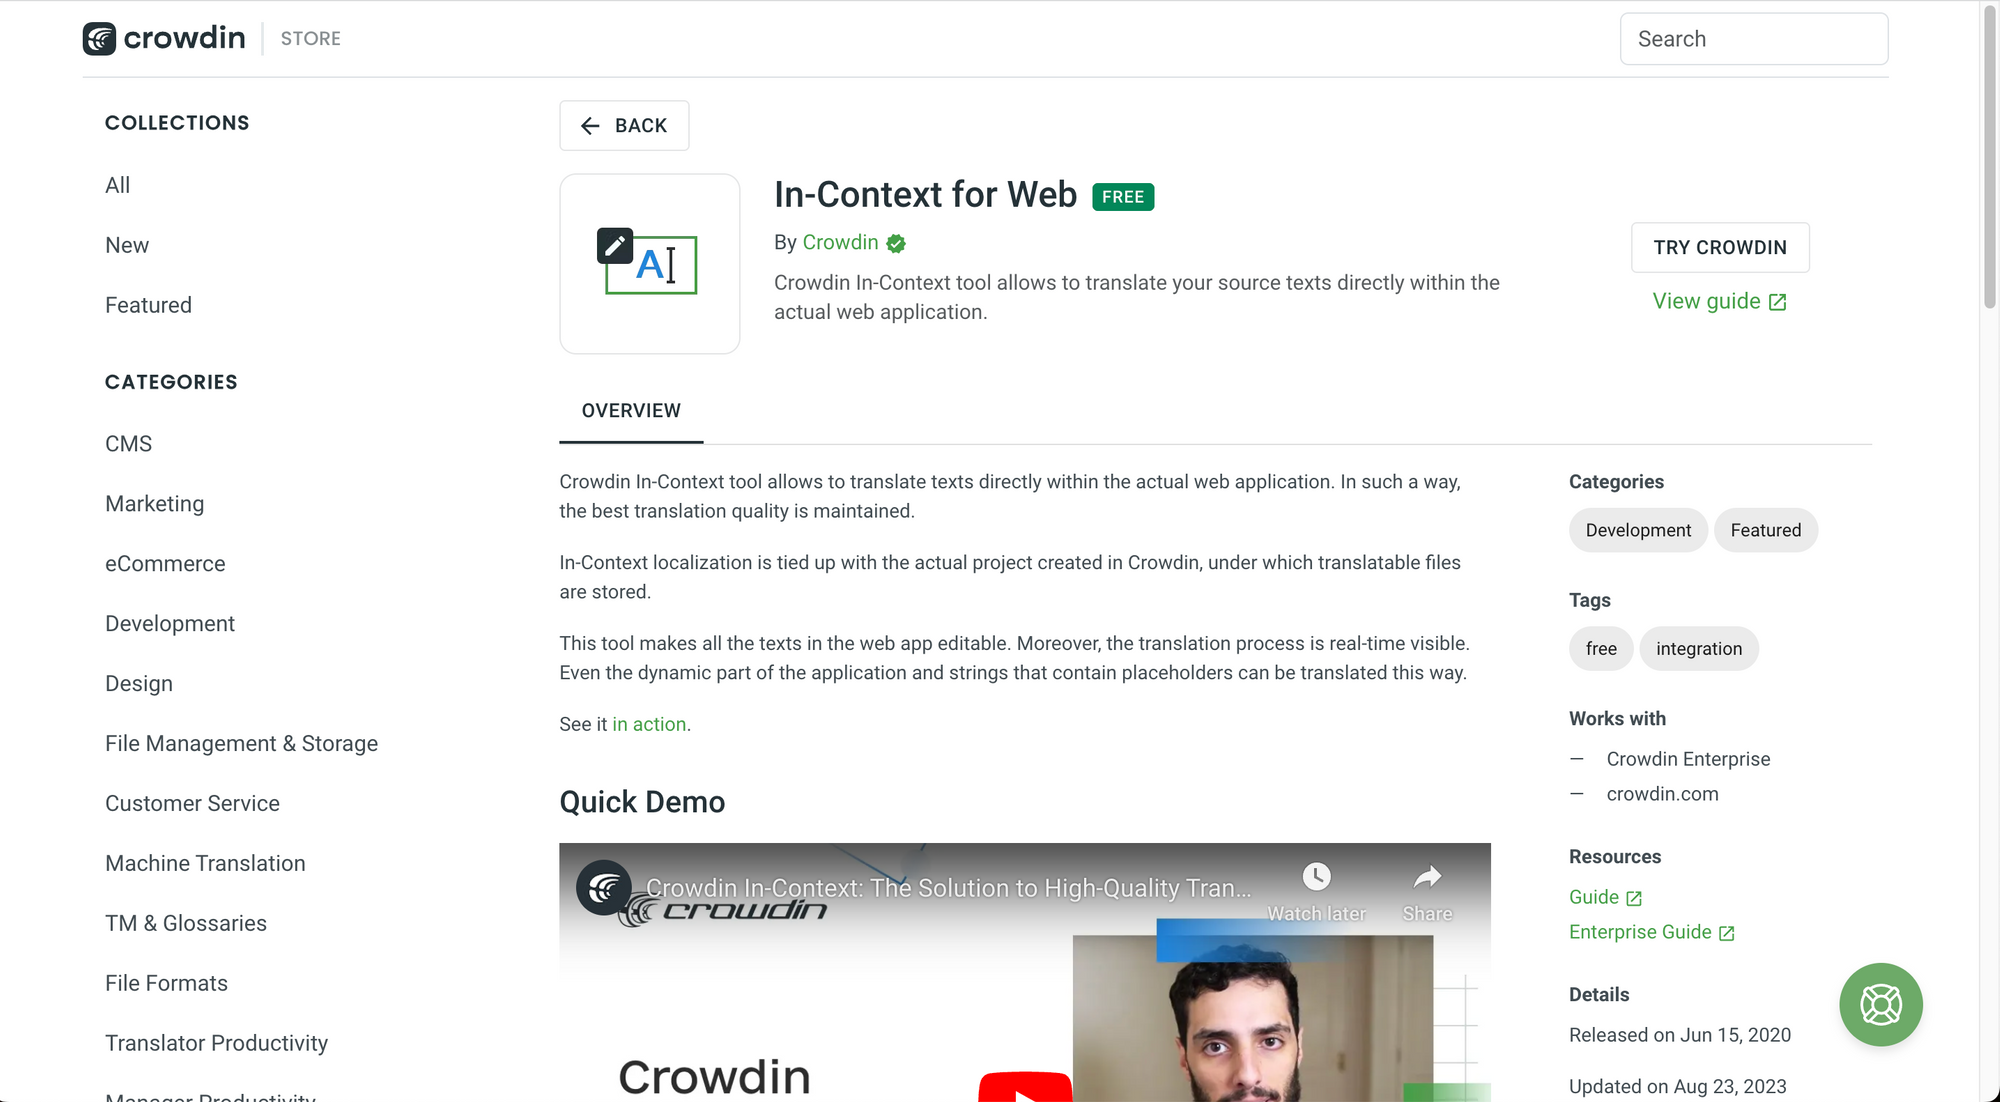 crowdin-in-context